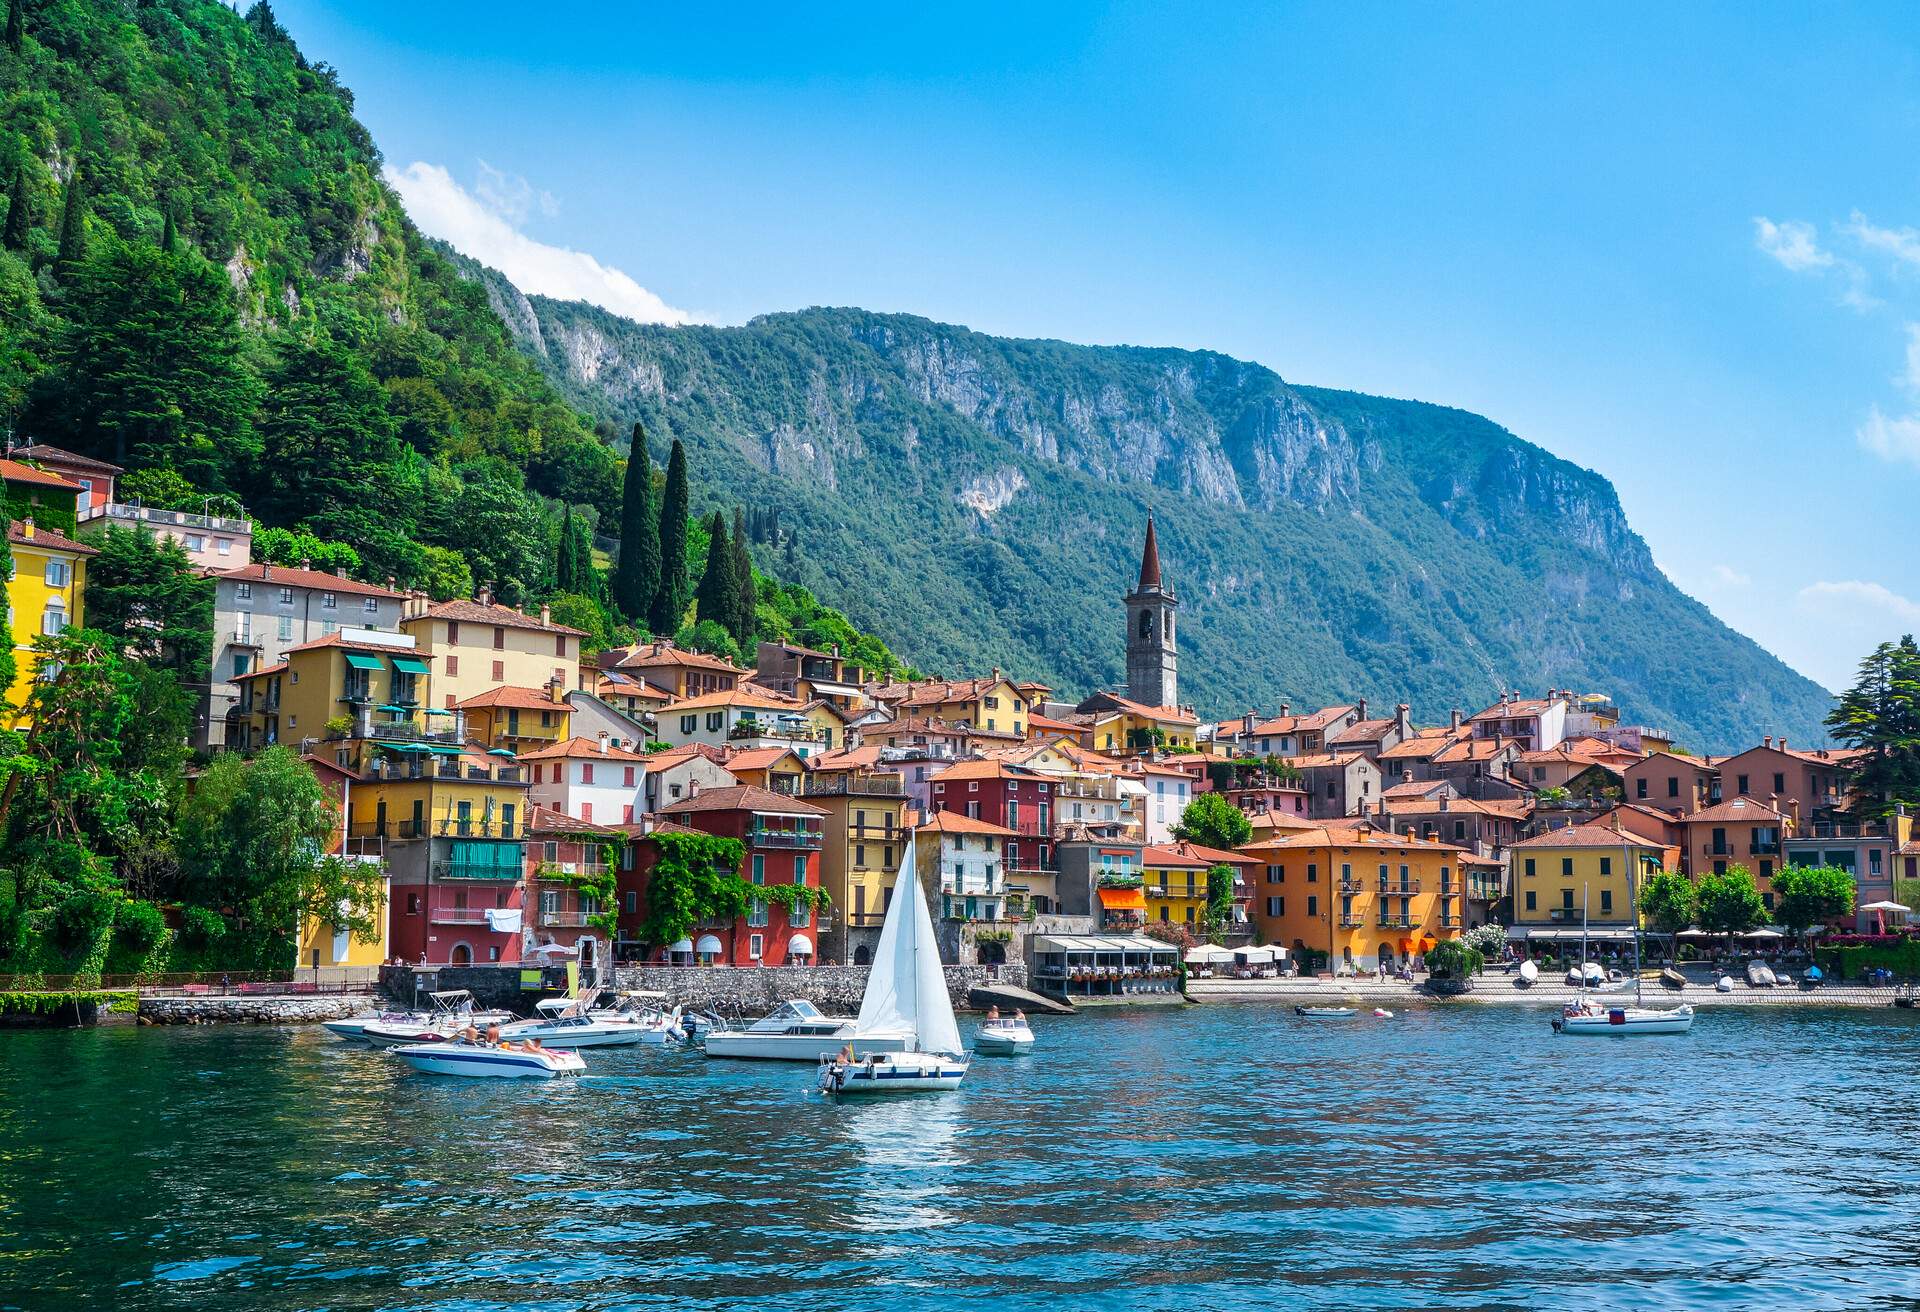 DEST_ITALY_LAKE-COMO_GettyImages-176496646